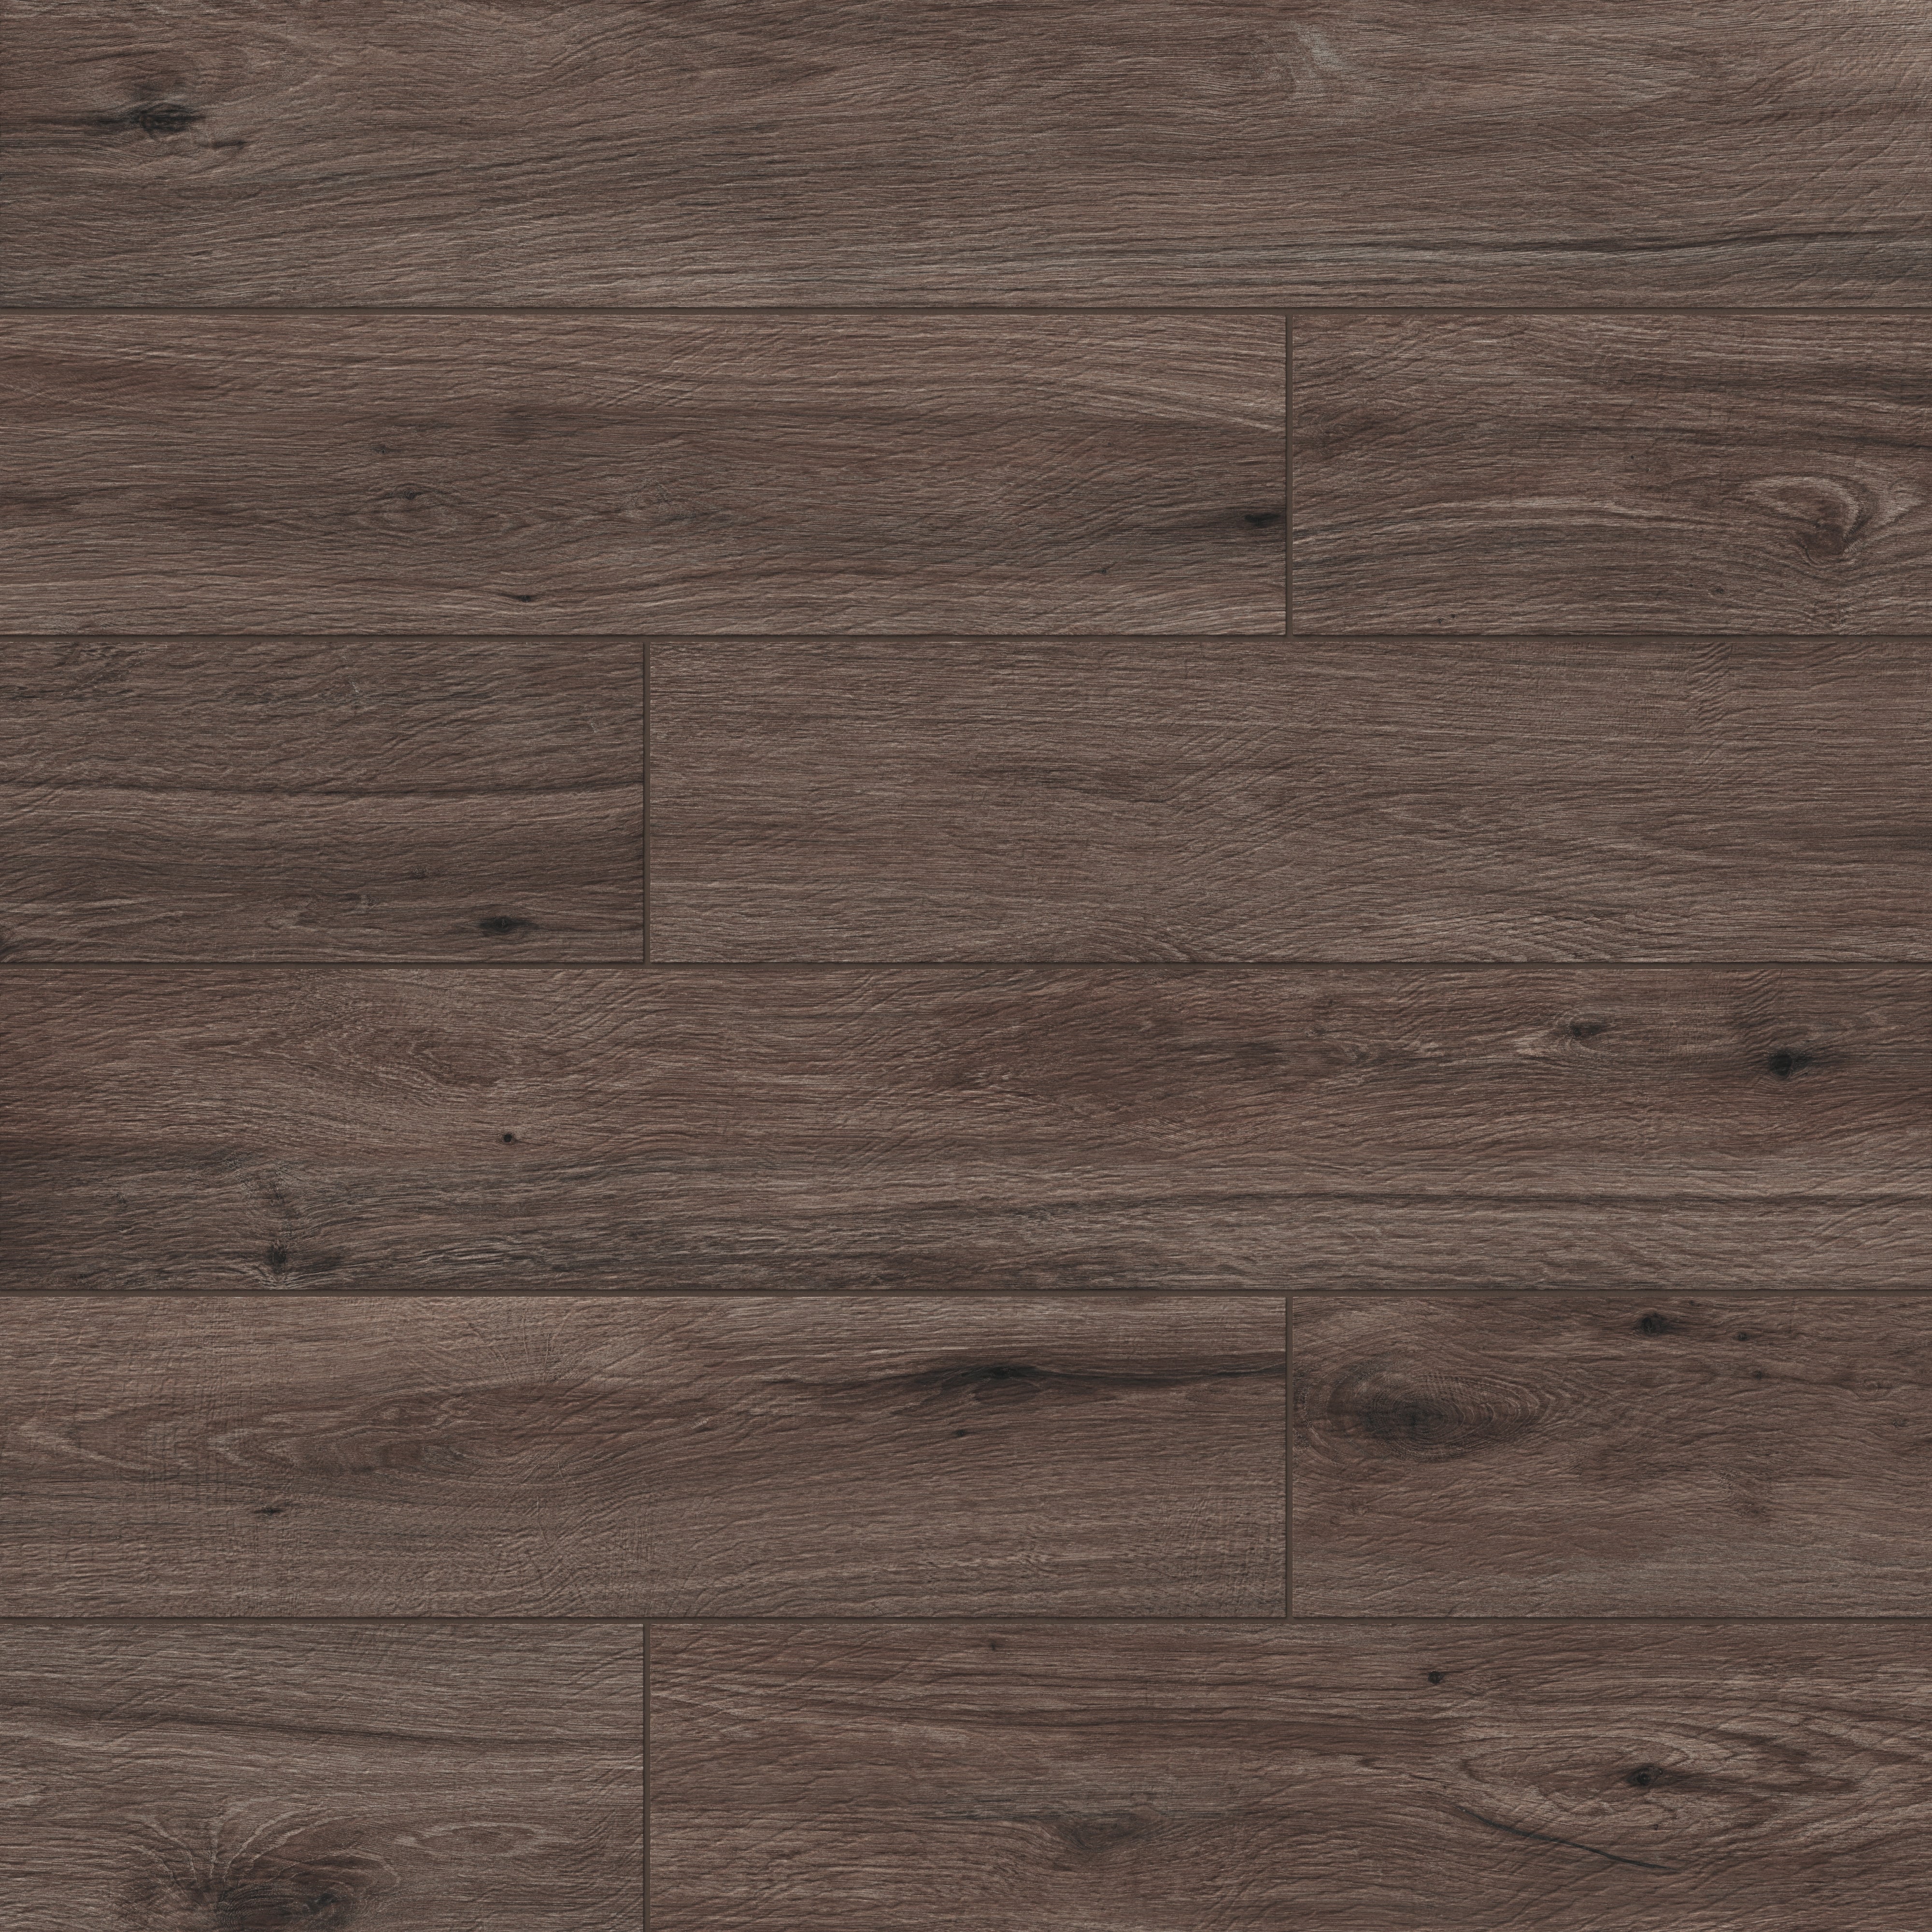 A glimpse of the Teak variation from Preston's porcelain planks, exuding a natural wooden essence and beauty.